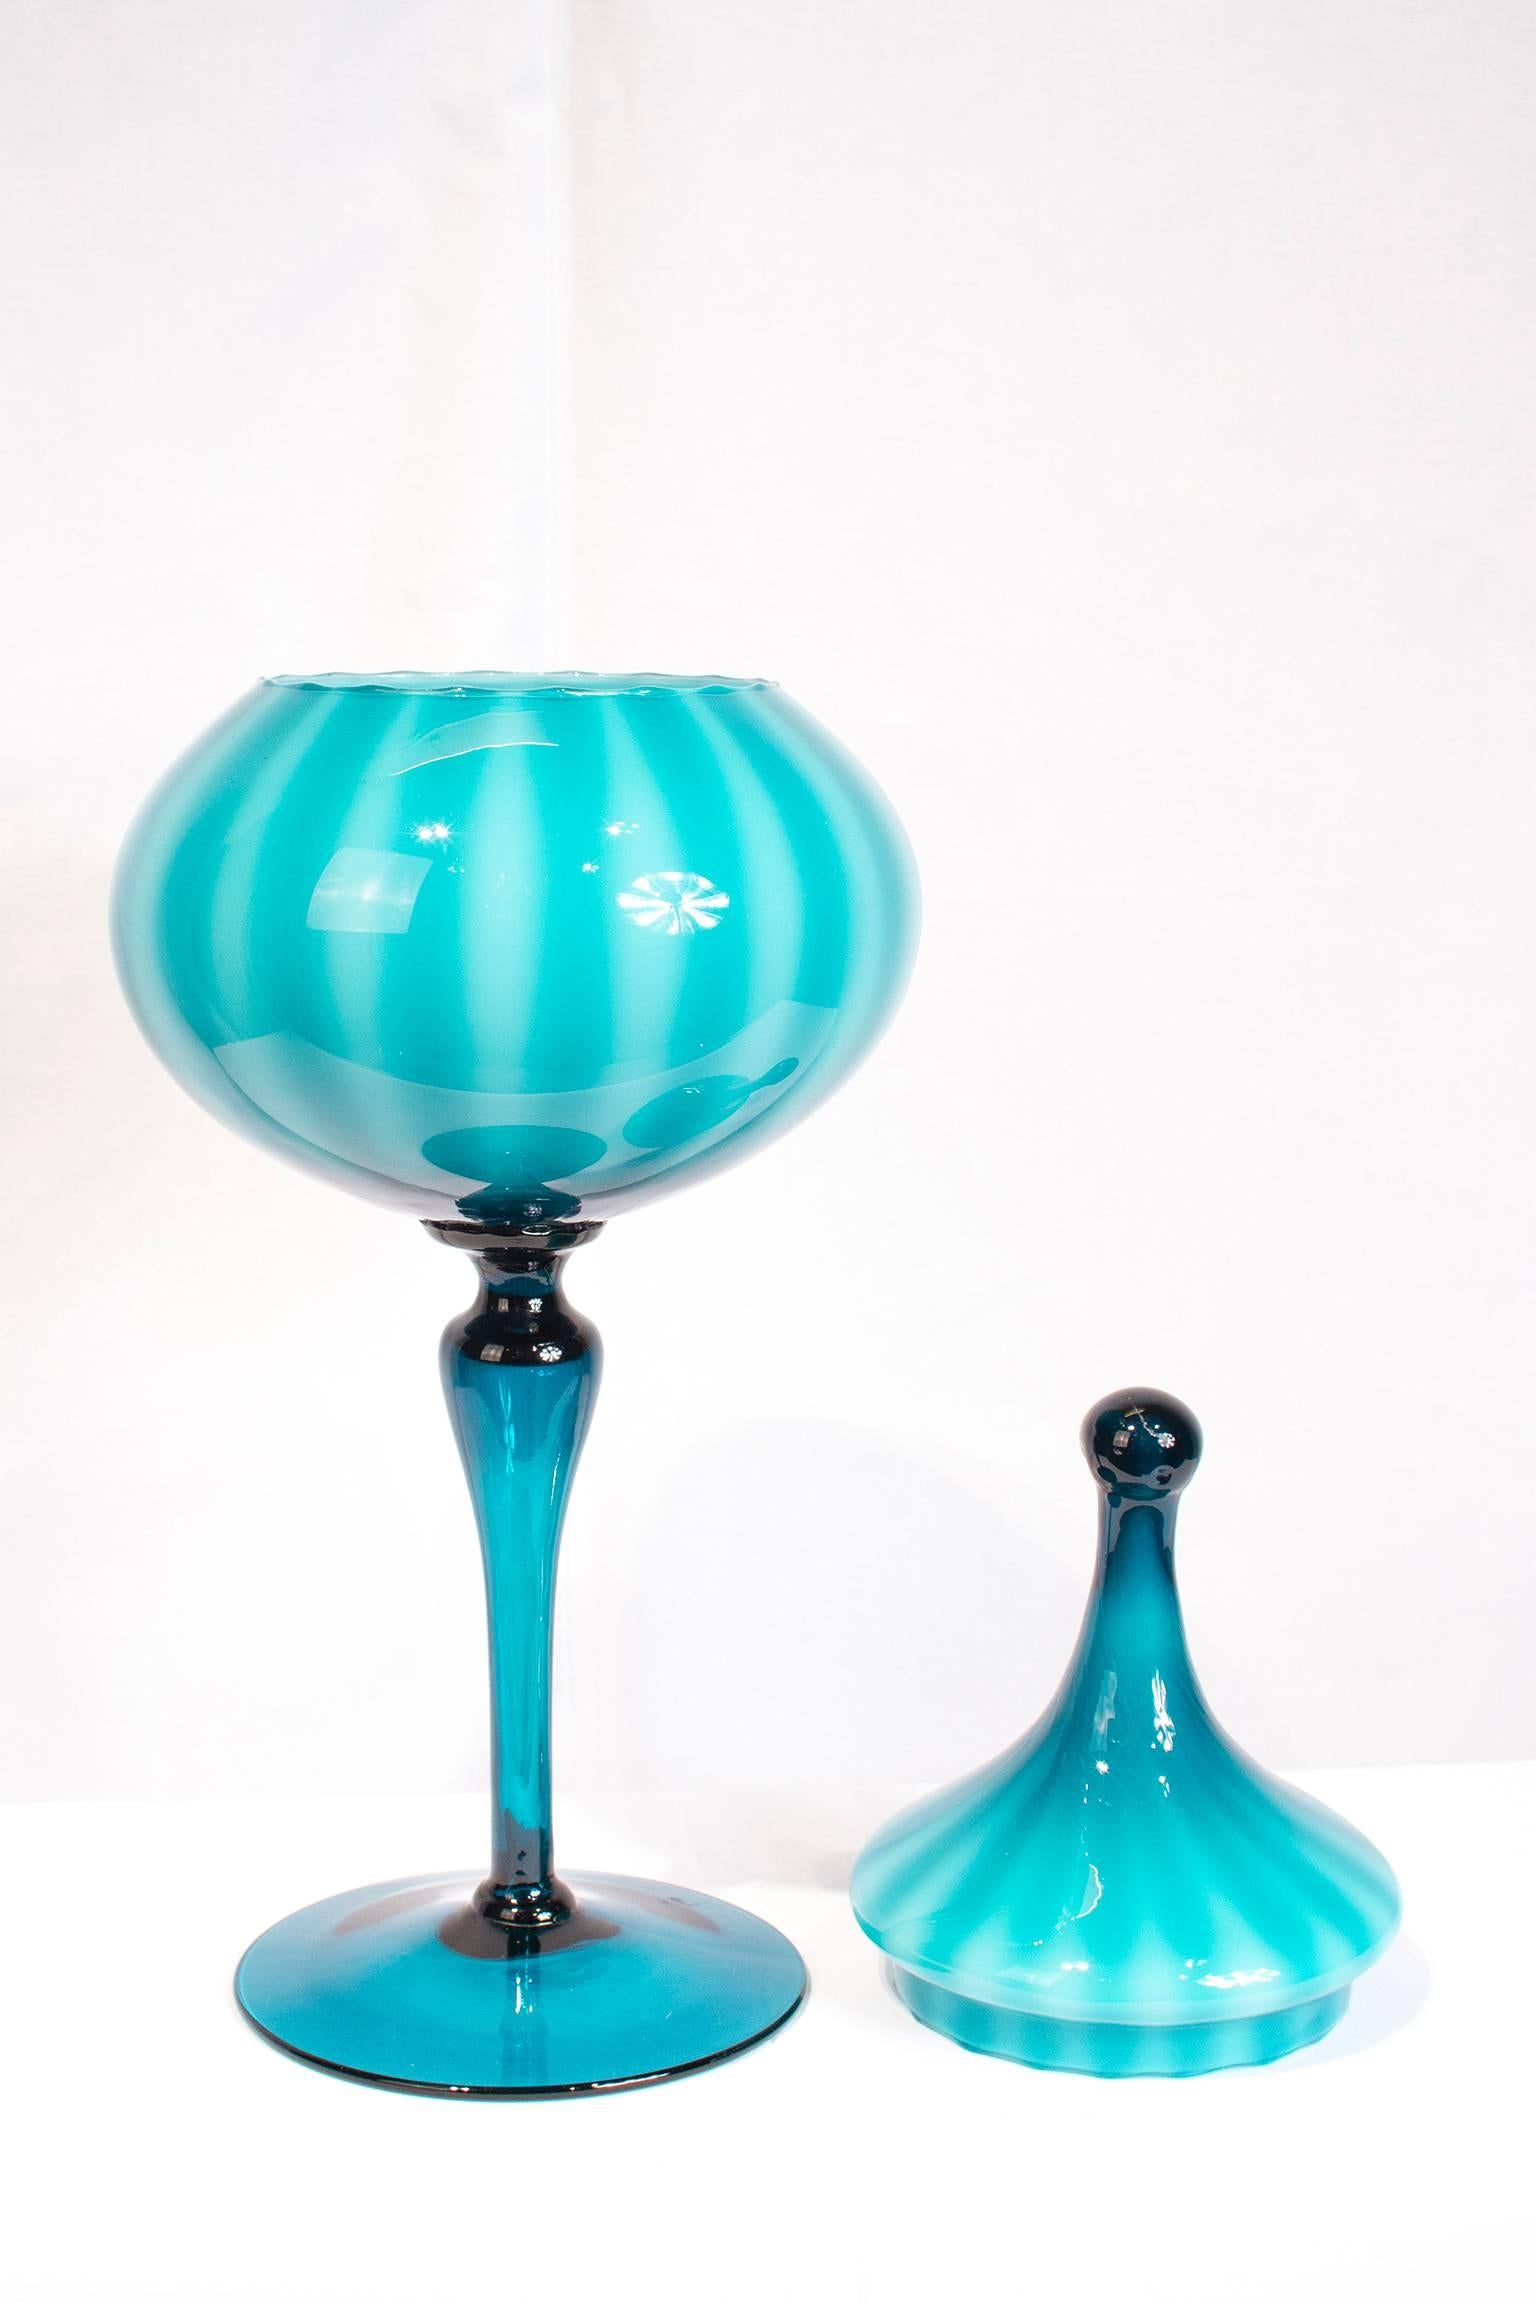 Italian Empoli art glass from the mid-20th century. Excellent condition.
Available in larger assortments.  
Please look at our Storefront page to browse our entire collection. 